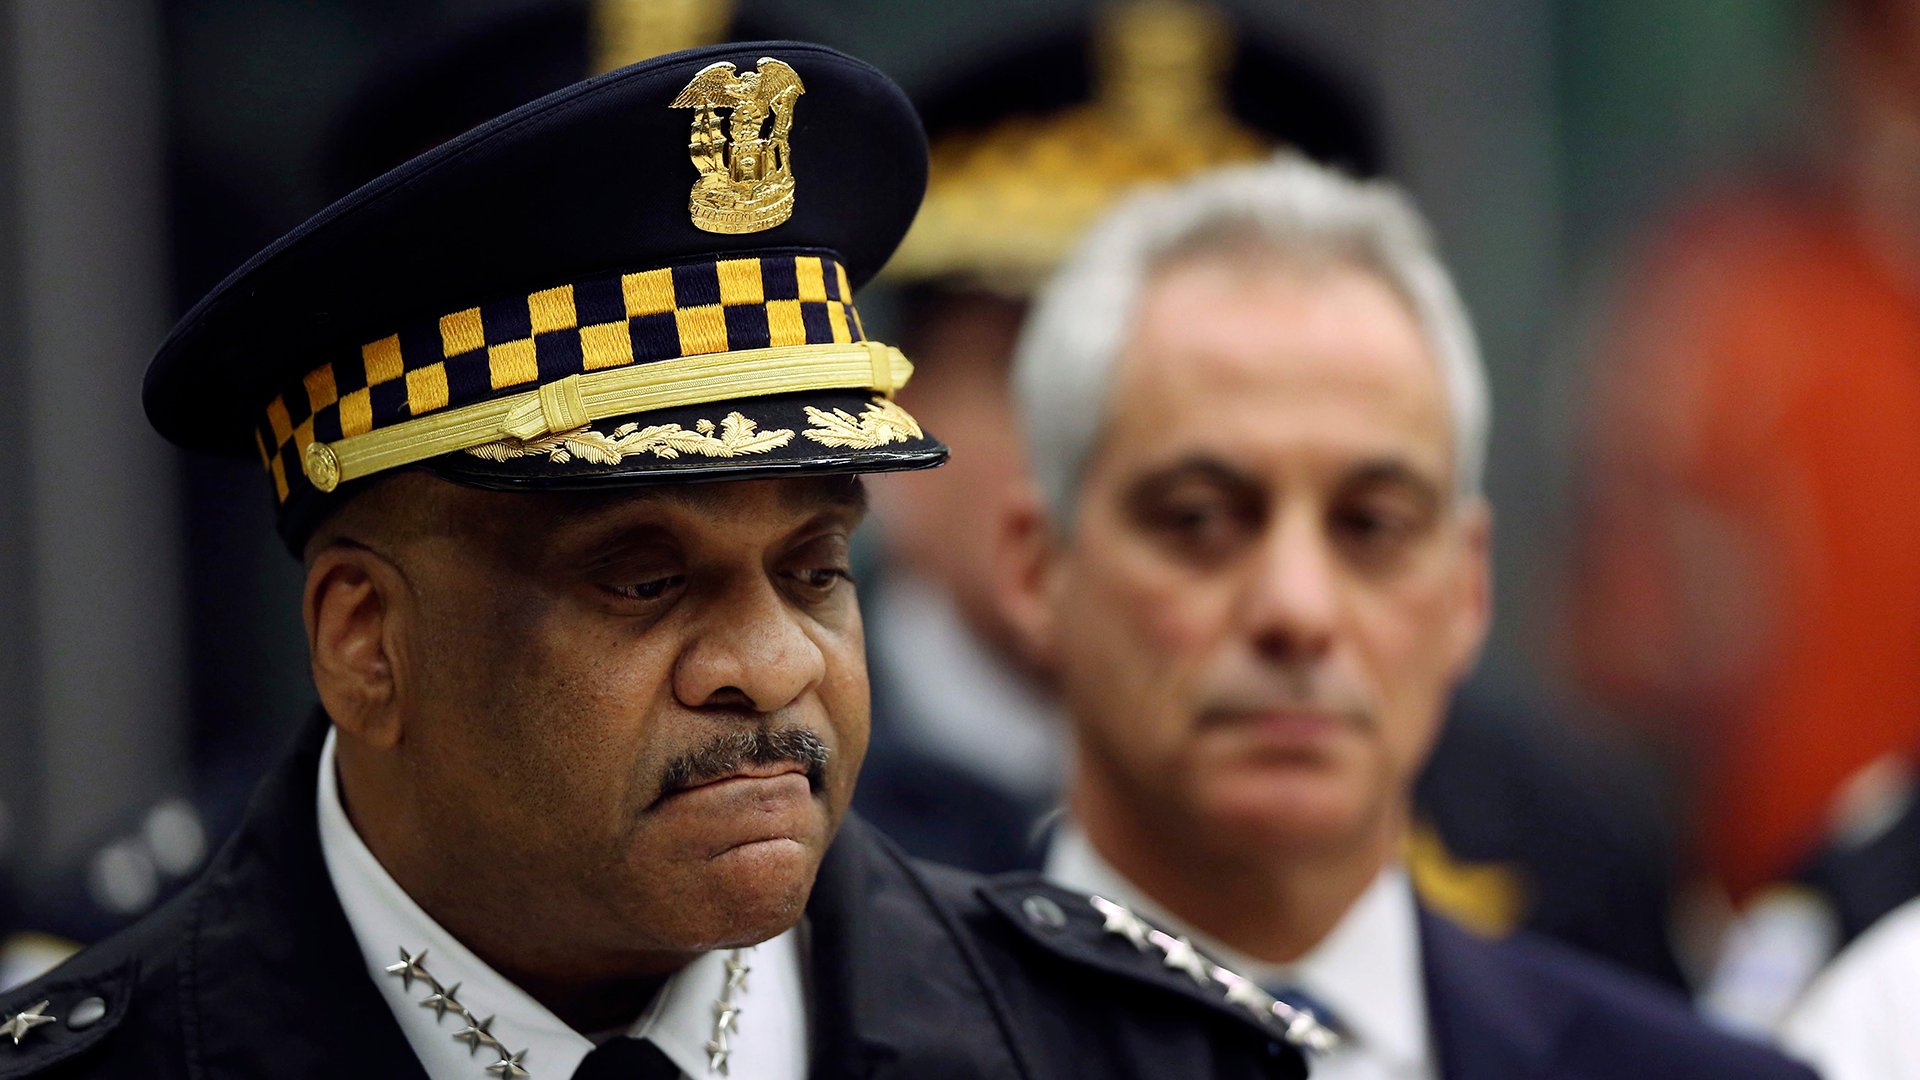 Chicago Police Superintendent Eddie Johnson, left, and Mayor Rahm Emanuel speak Monday, Nov. 19, 2018, during a news conference at the University of Chicago Medical Center after a gunman opened fire at Mercy Hospital. (Chris Walker / Chicago Tribune via AP)